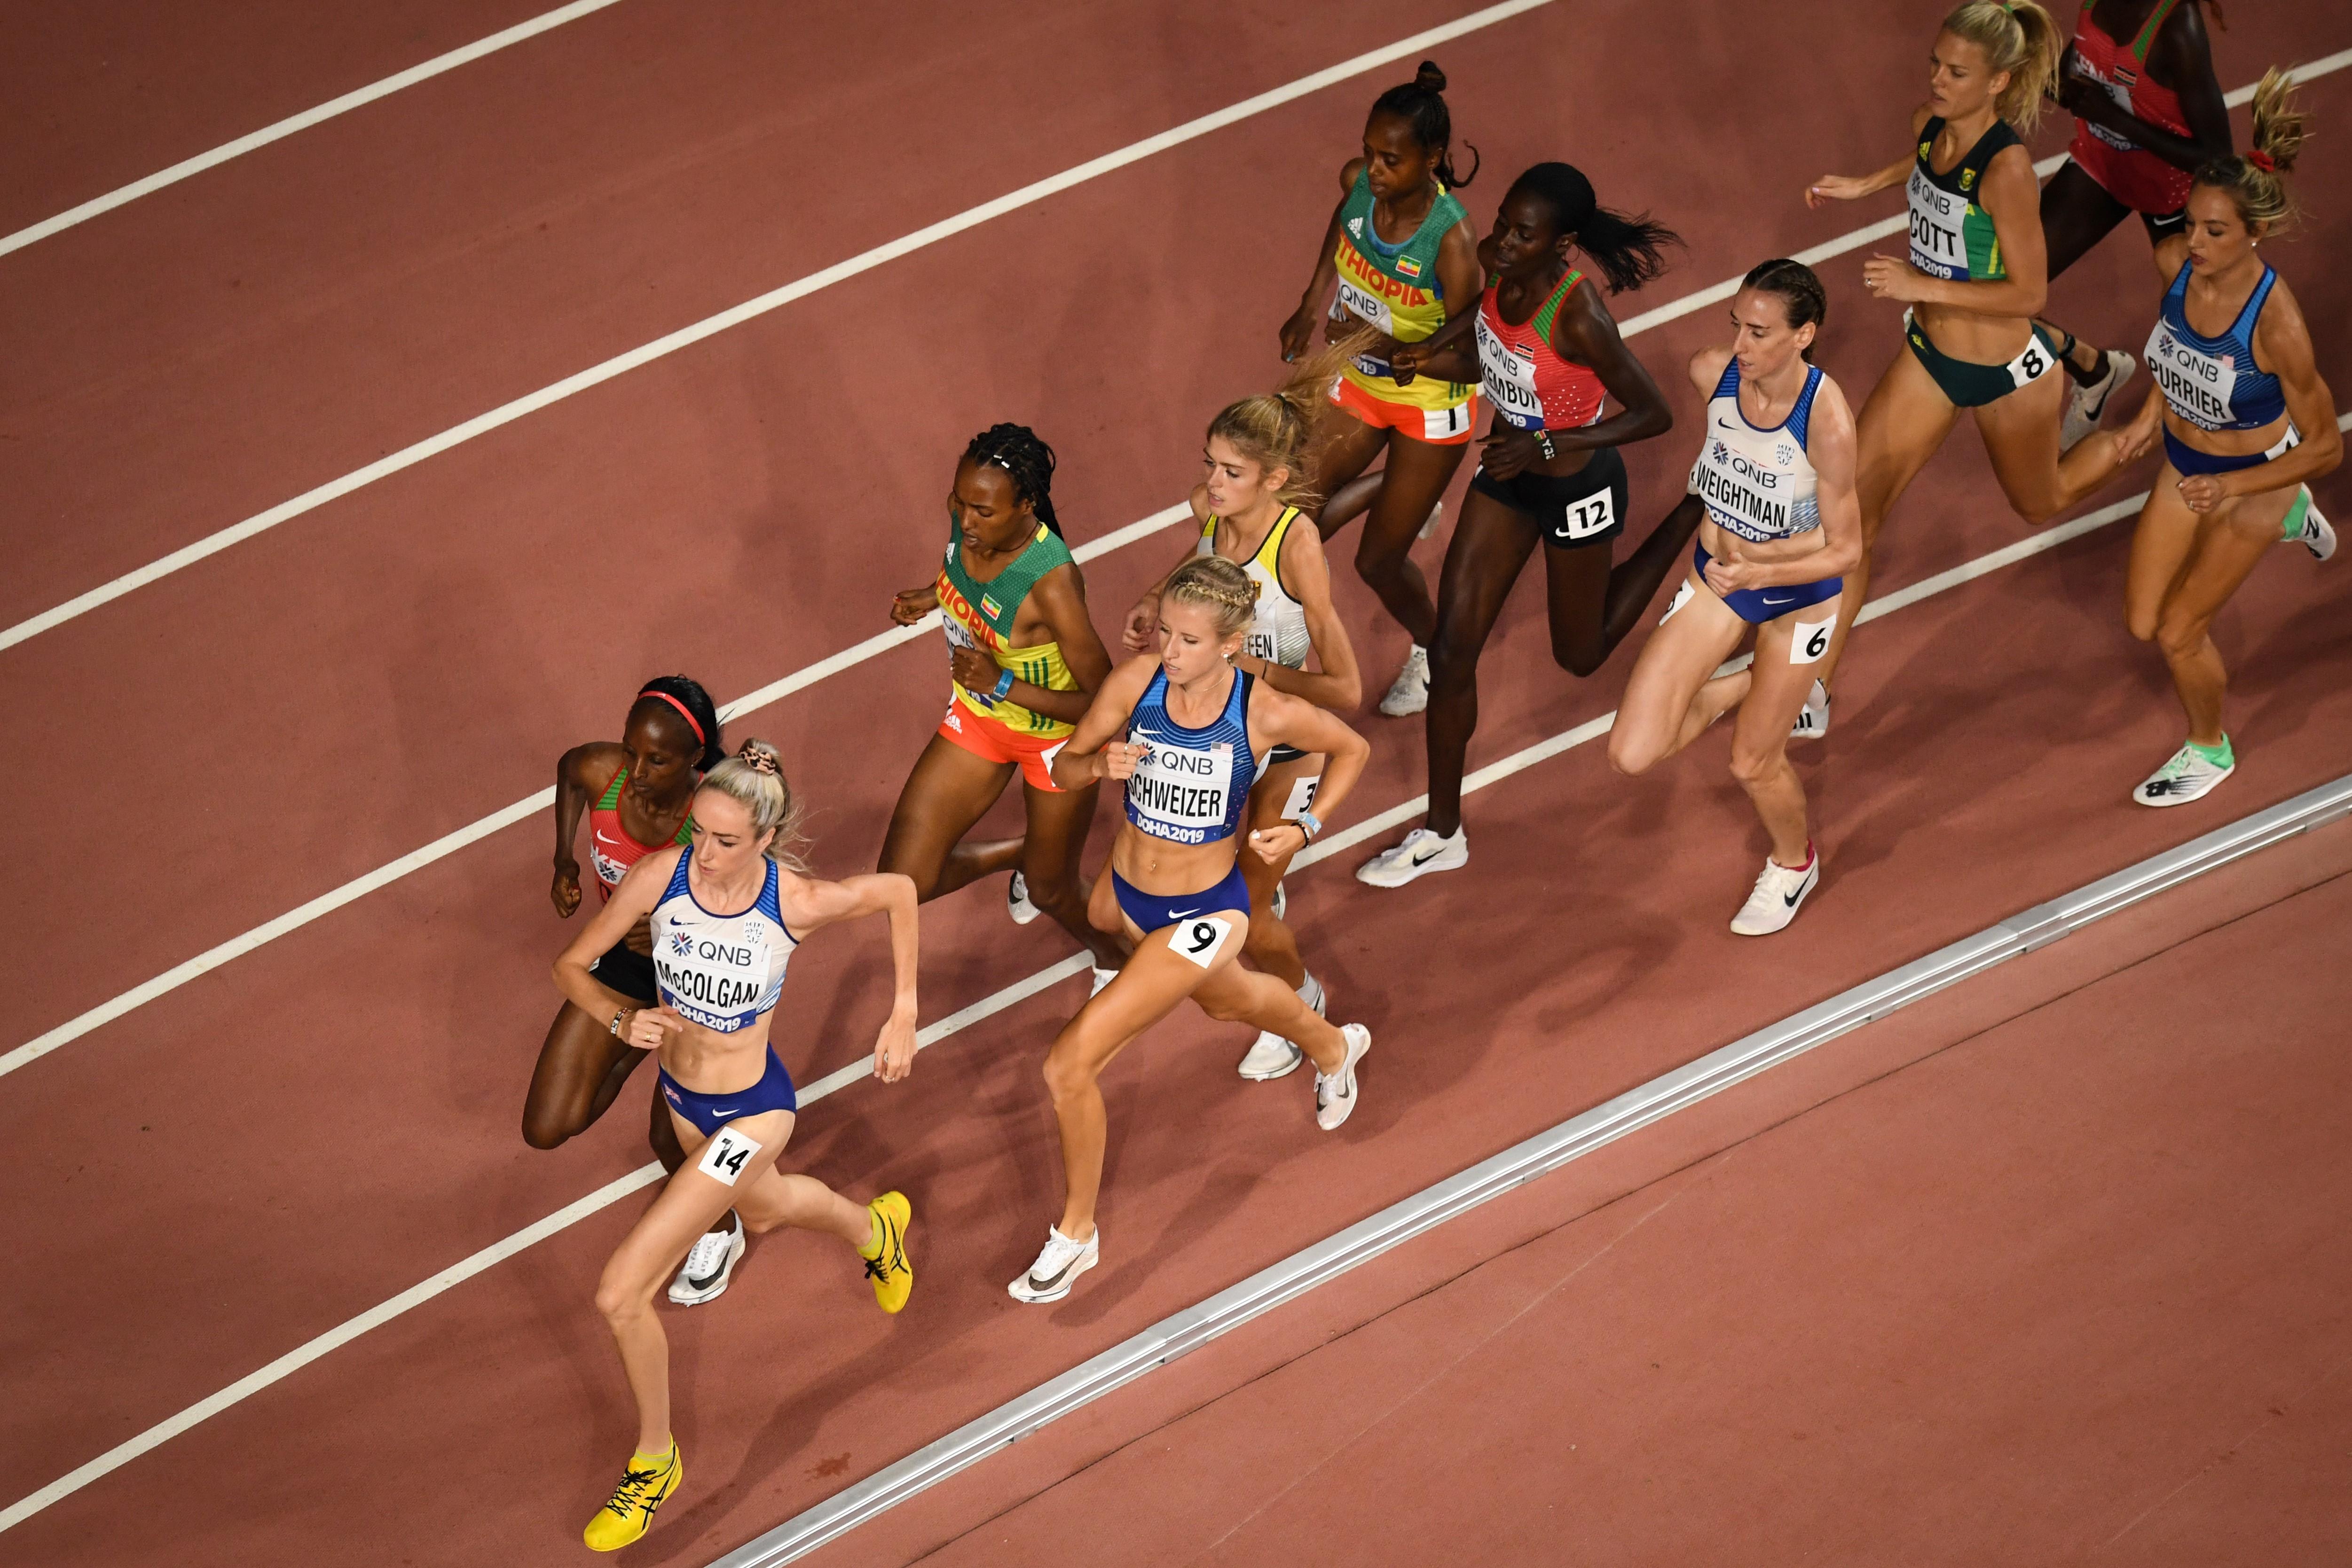 Athletes in action in the women's 5000m at the World Championships (AFP / Getty Images)